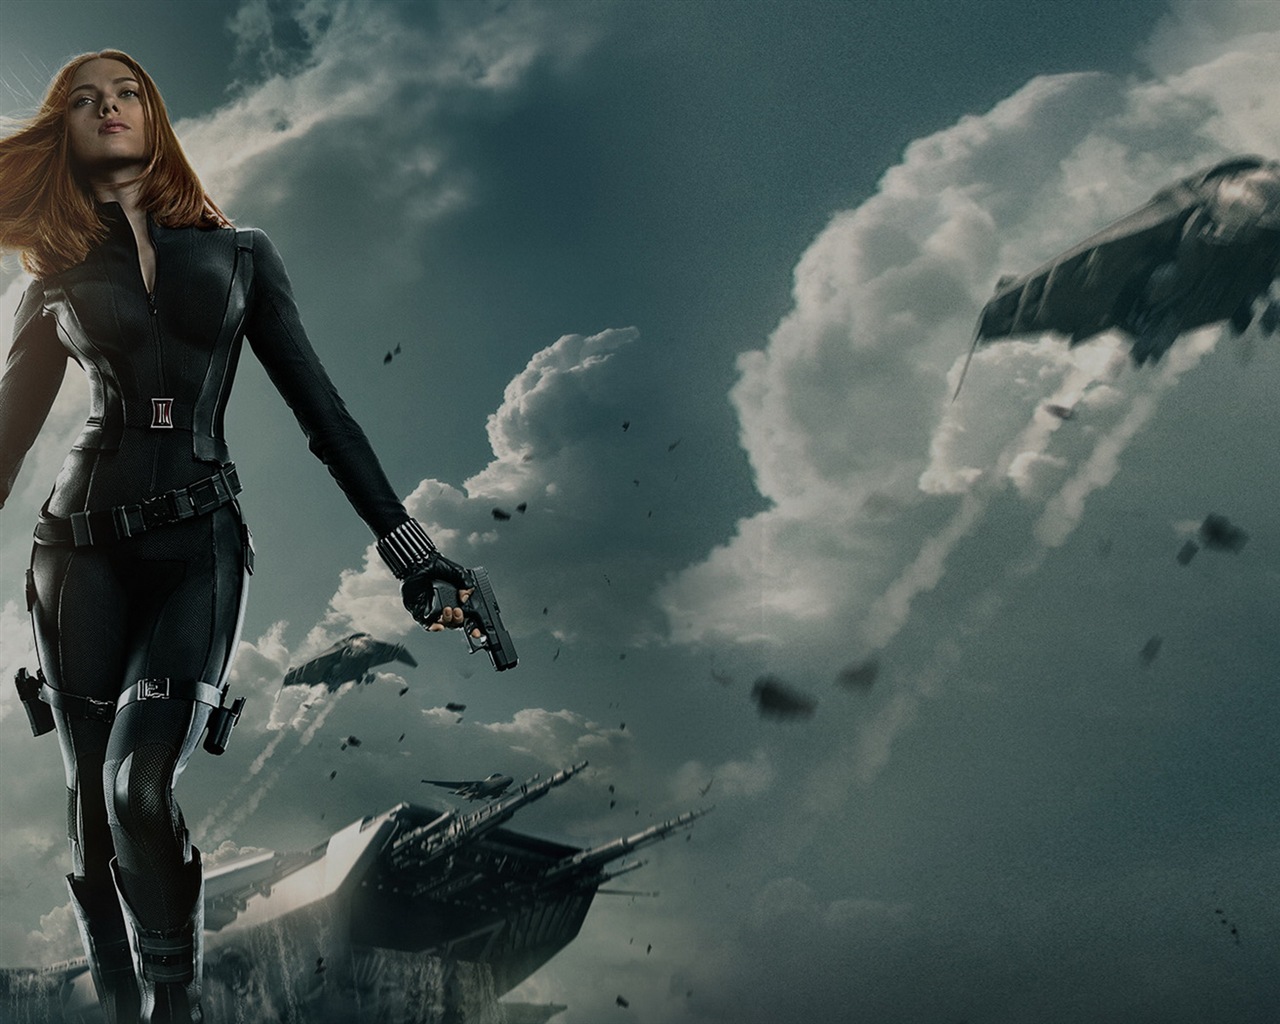 Captain America: The Winter Soldier HD wallpapers #8 - 1280x1024